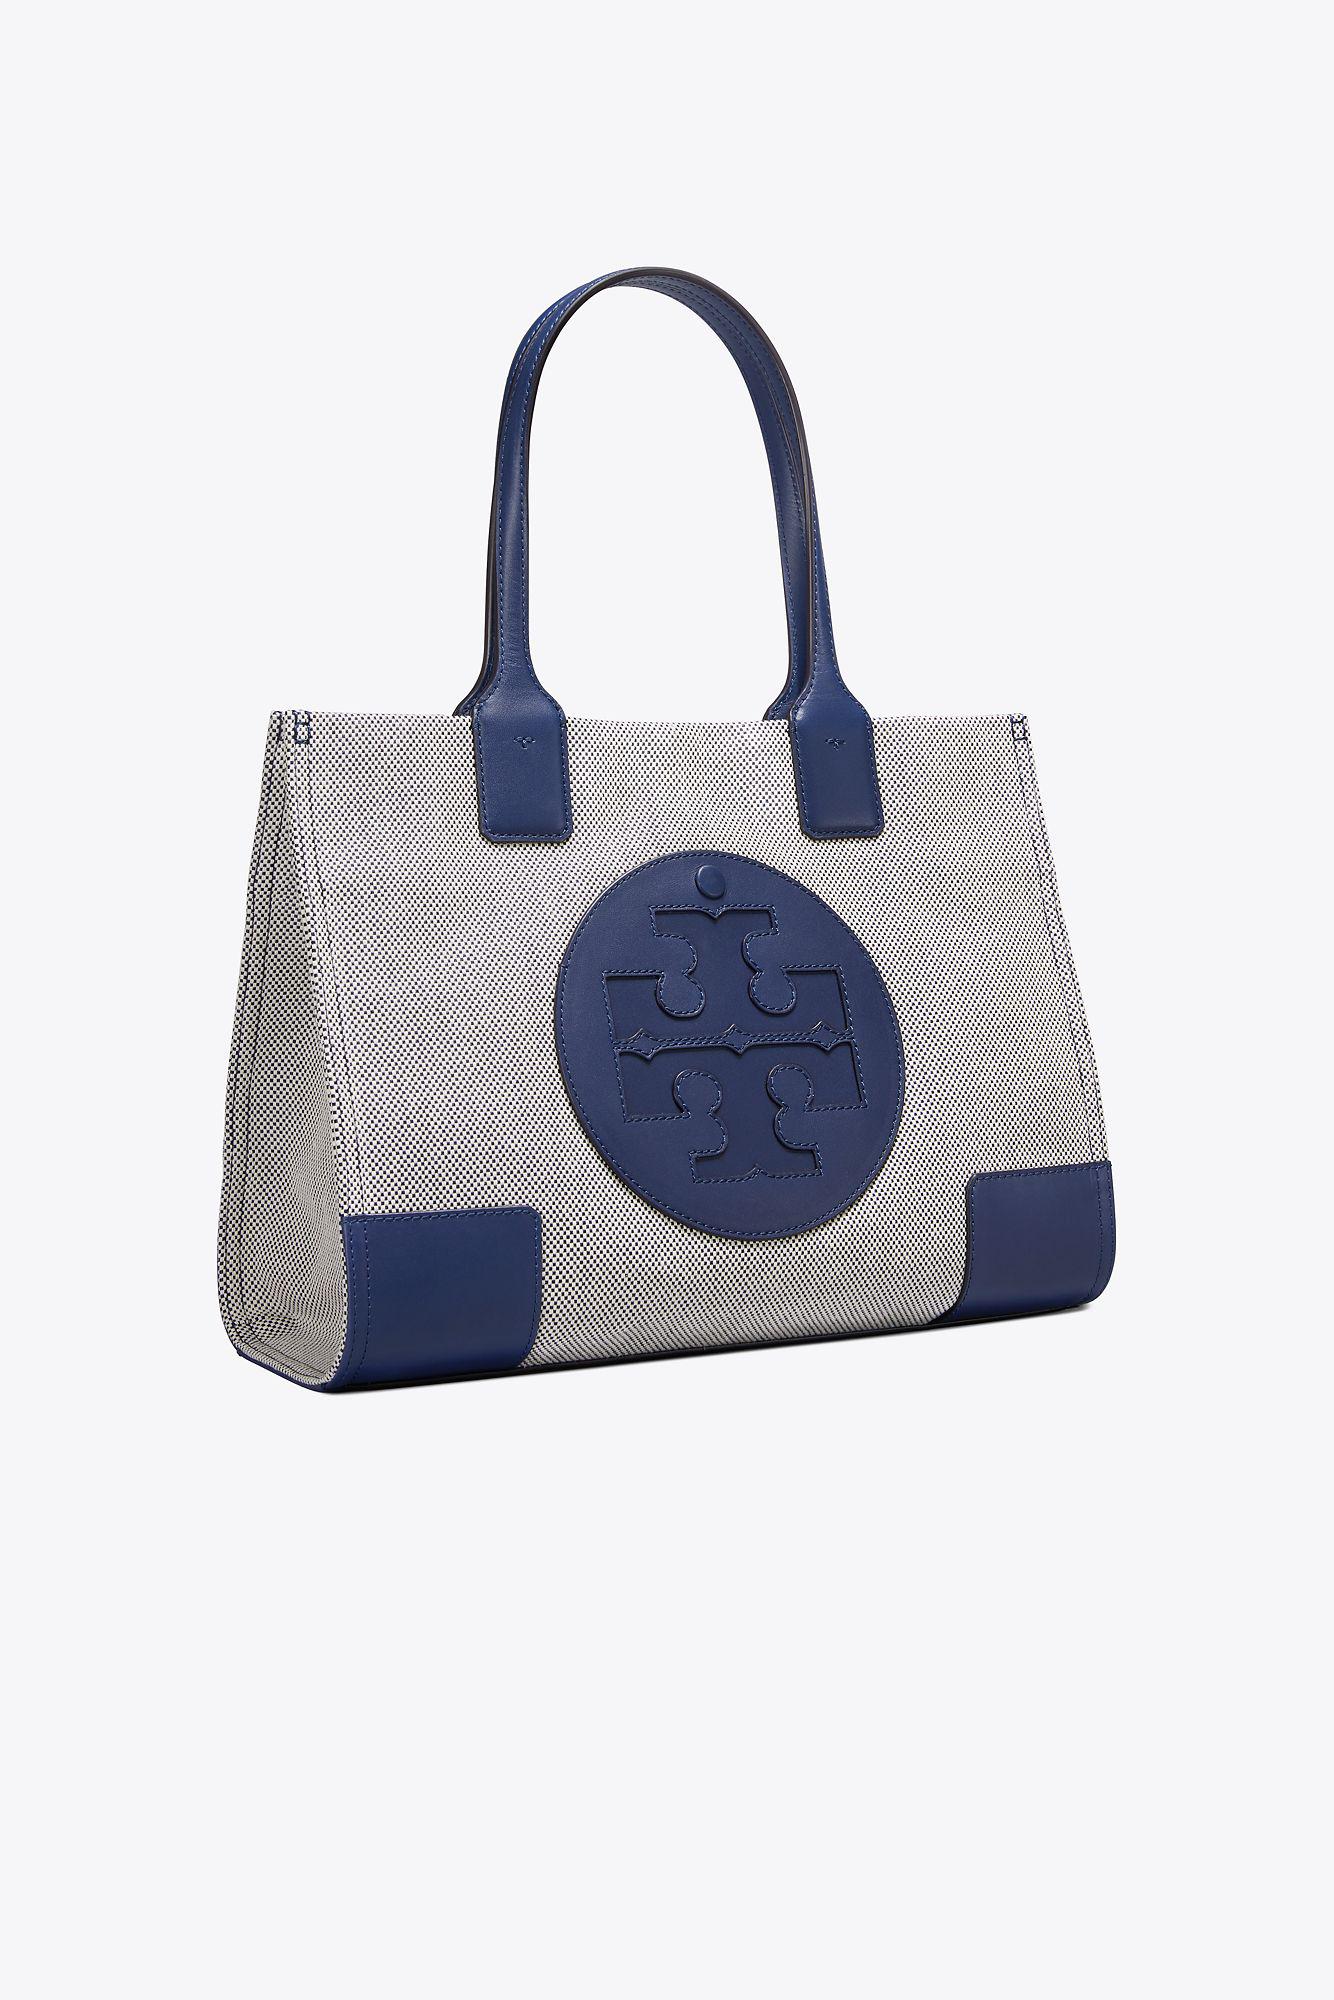 Tory Burch Navy Ella Canvas Tote, Best Price and Reviews